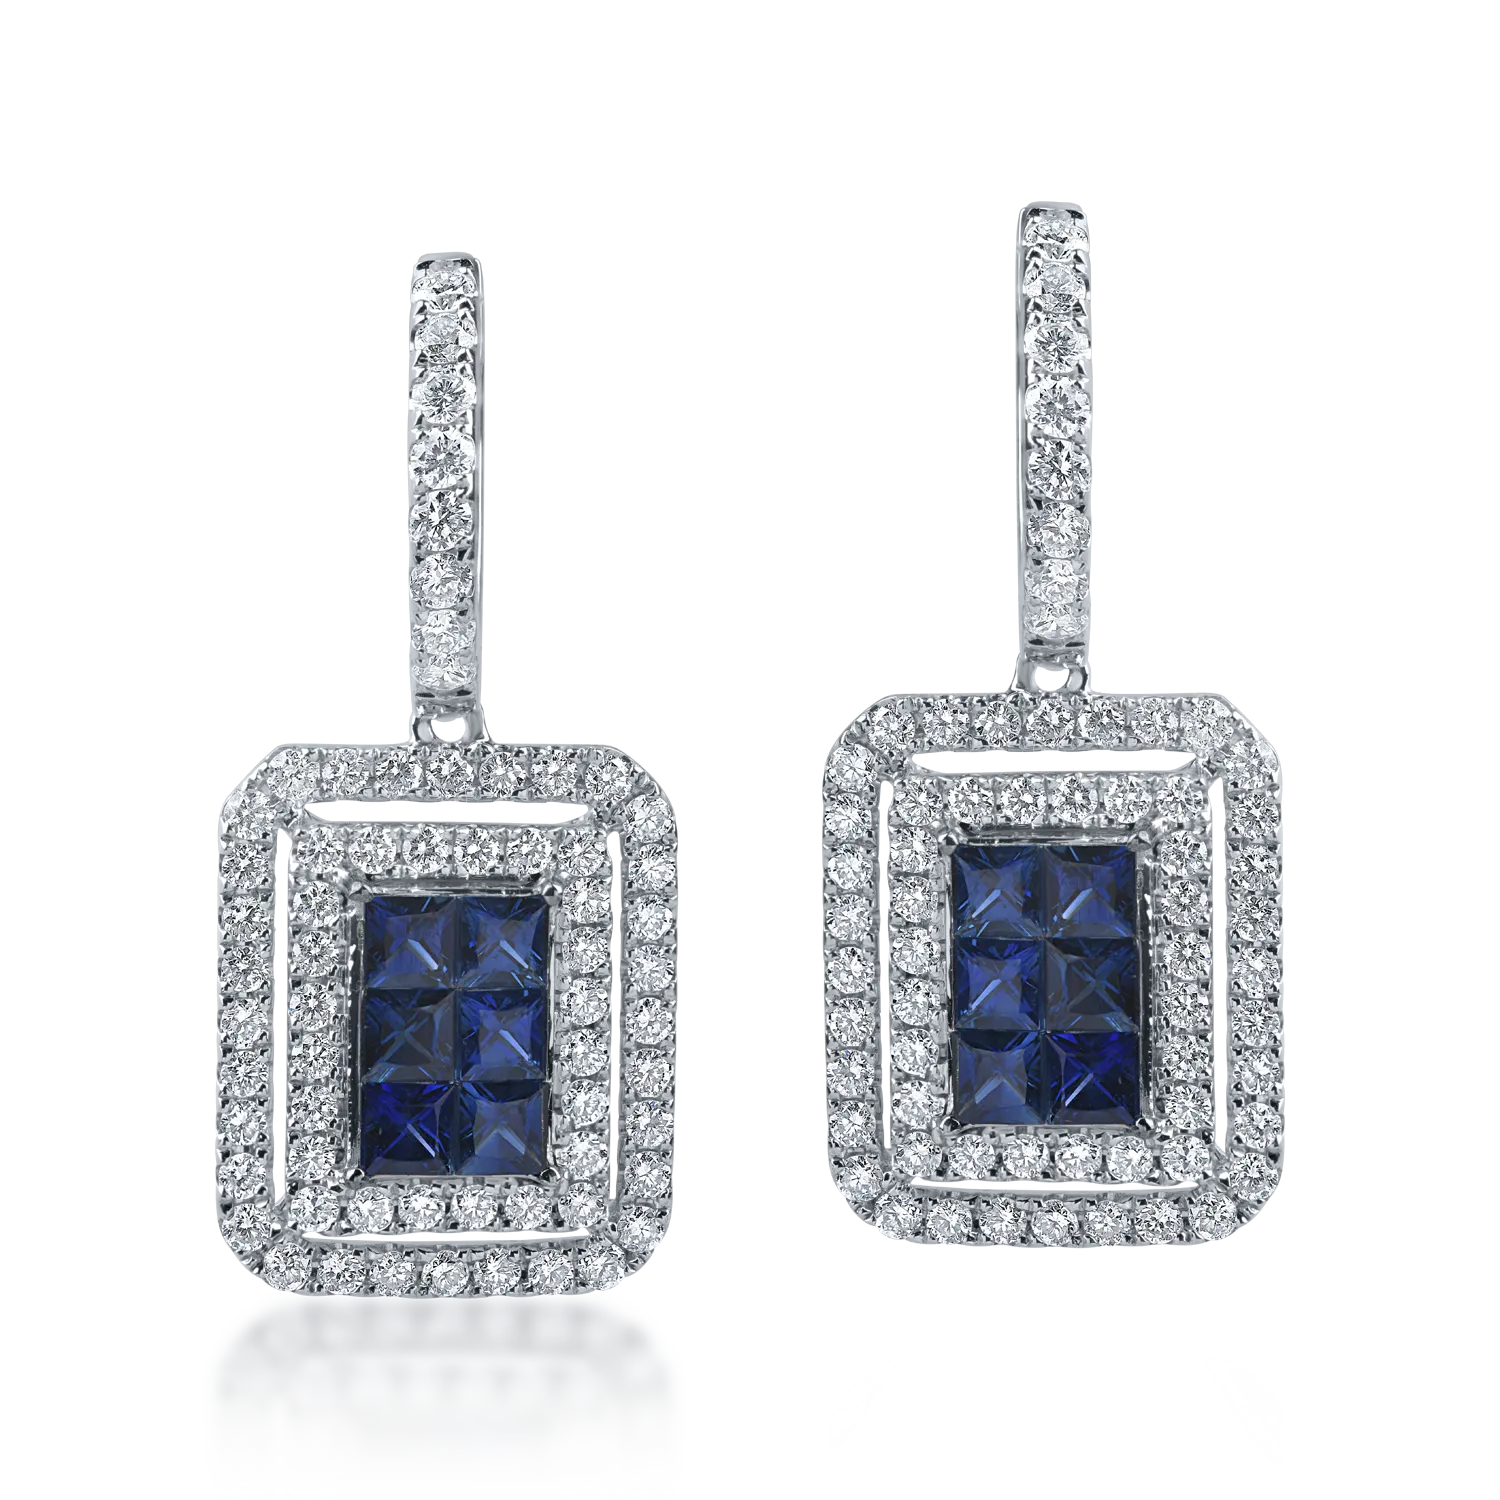 White gold geometric earrings with 1.1ct sapphires and 1.2ct diamonds